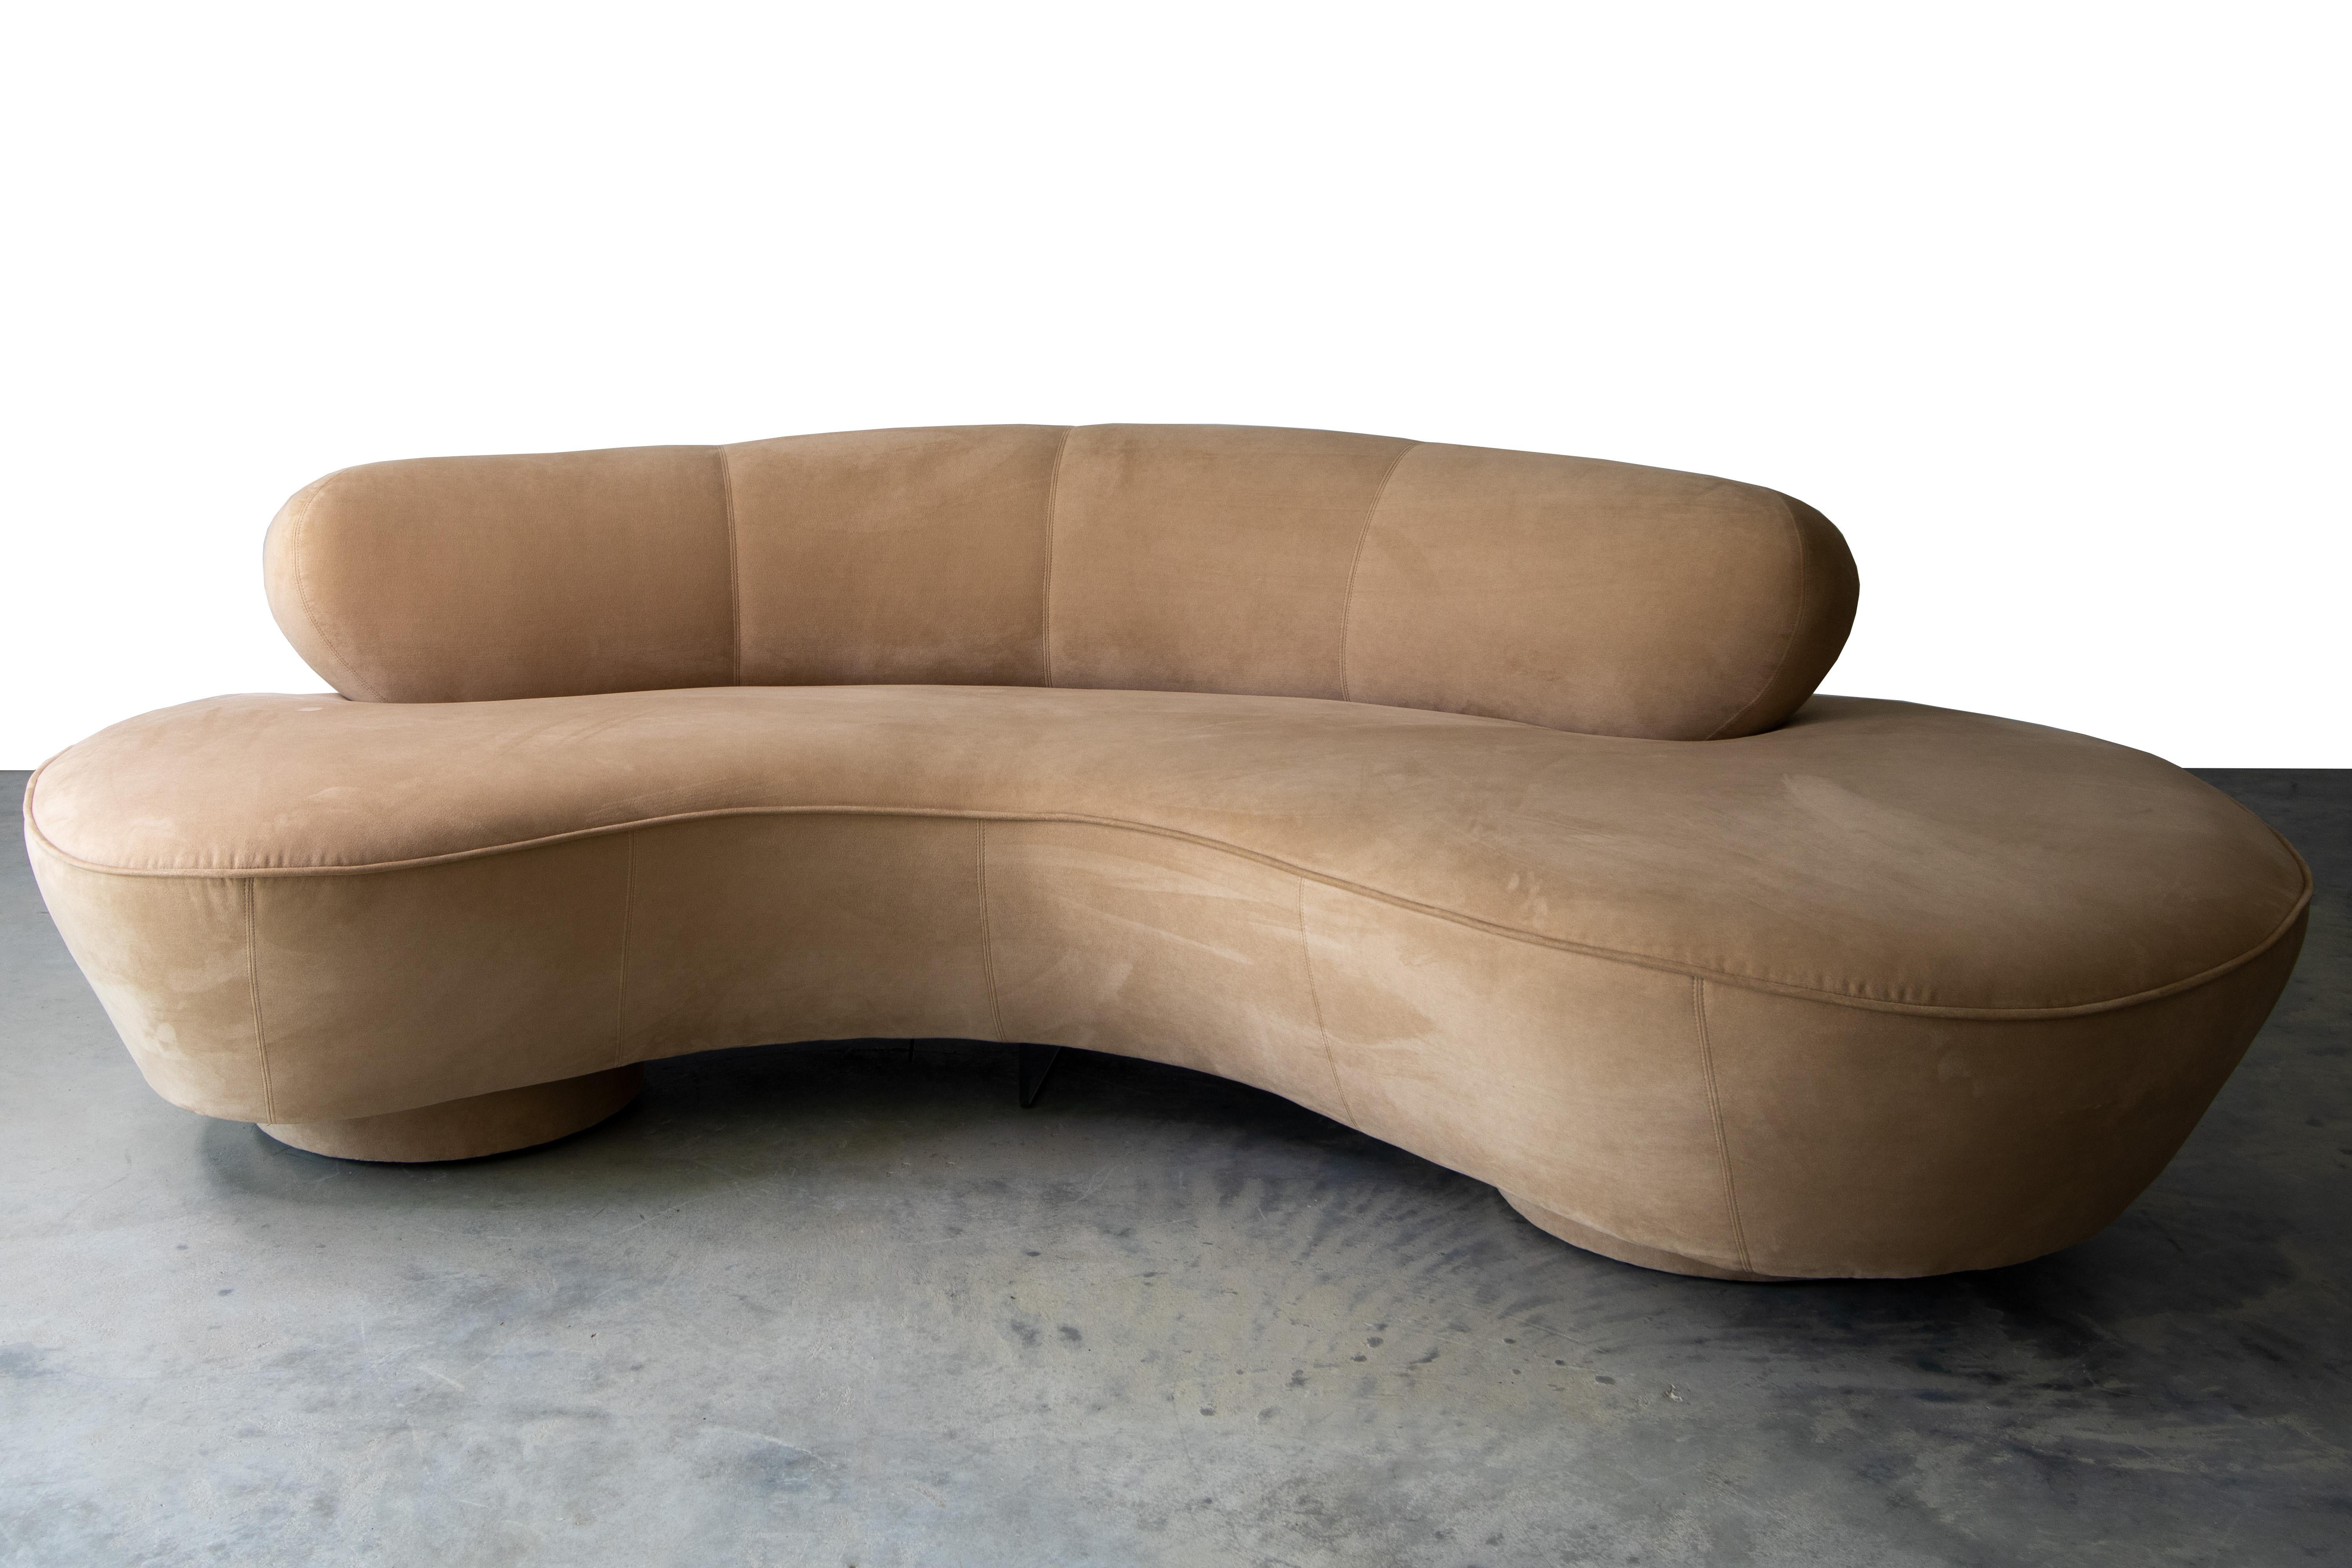 Fabric Vladimir Kagan Long Island Cloud Sofa for Directional with Lucite Leg Support